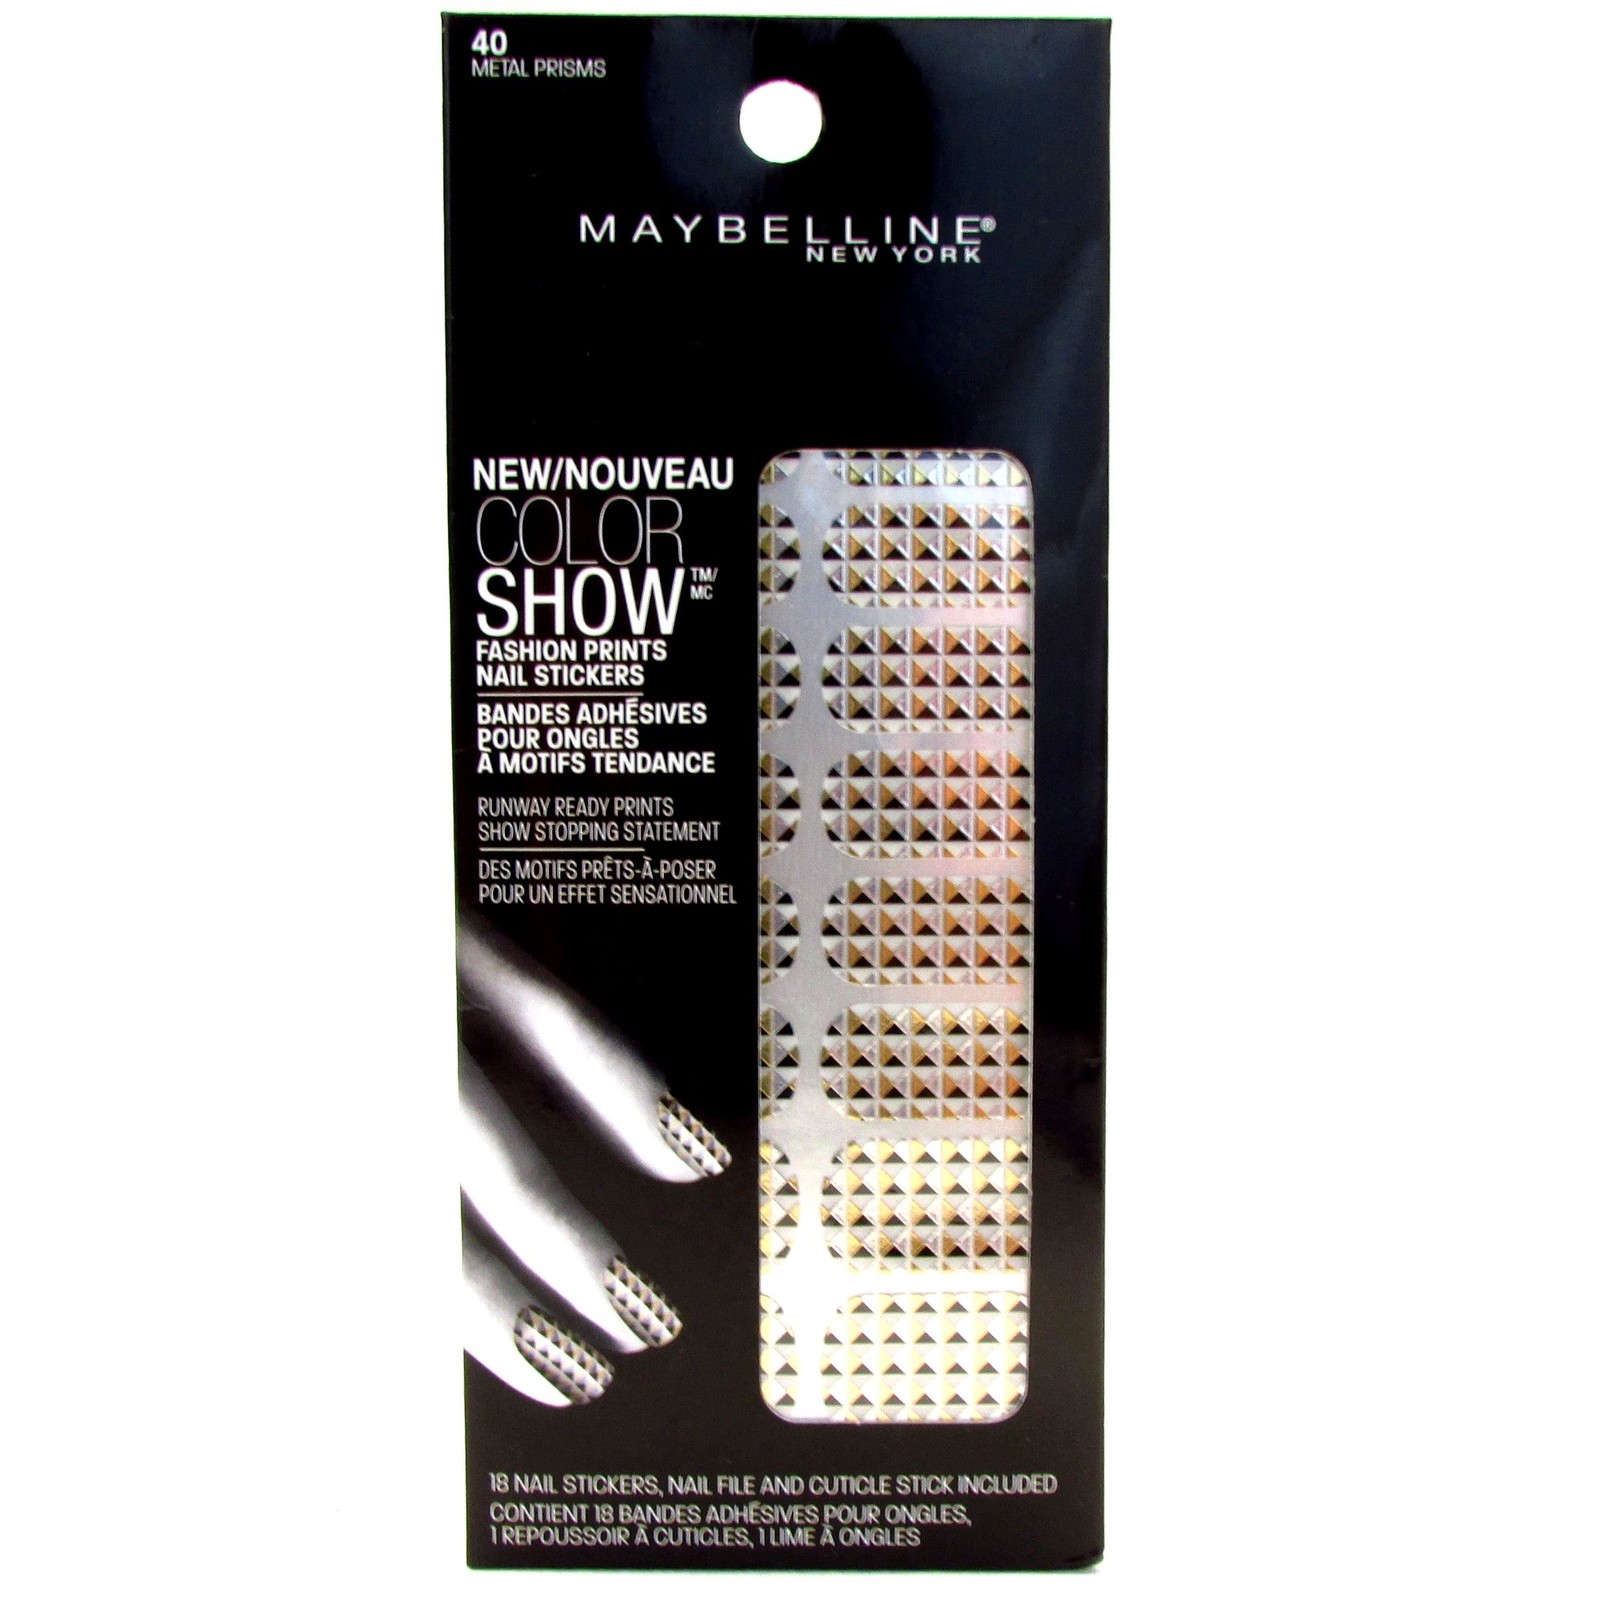 Maybelline Limited Edition Color Show Fashion Prints Nail Stickers - 40 Metal Pr - $11.99